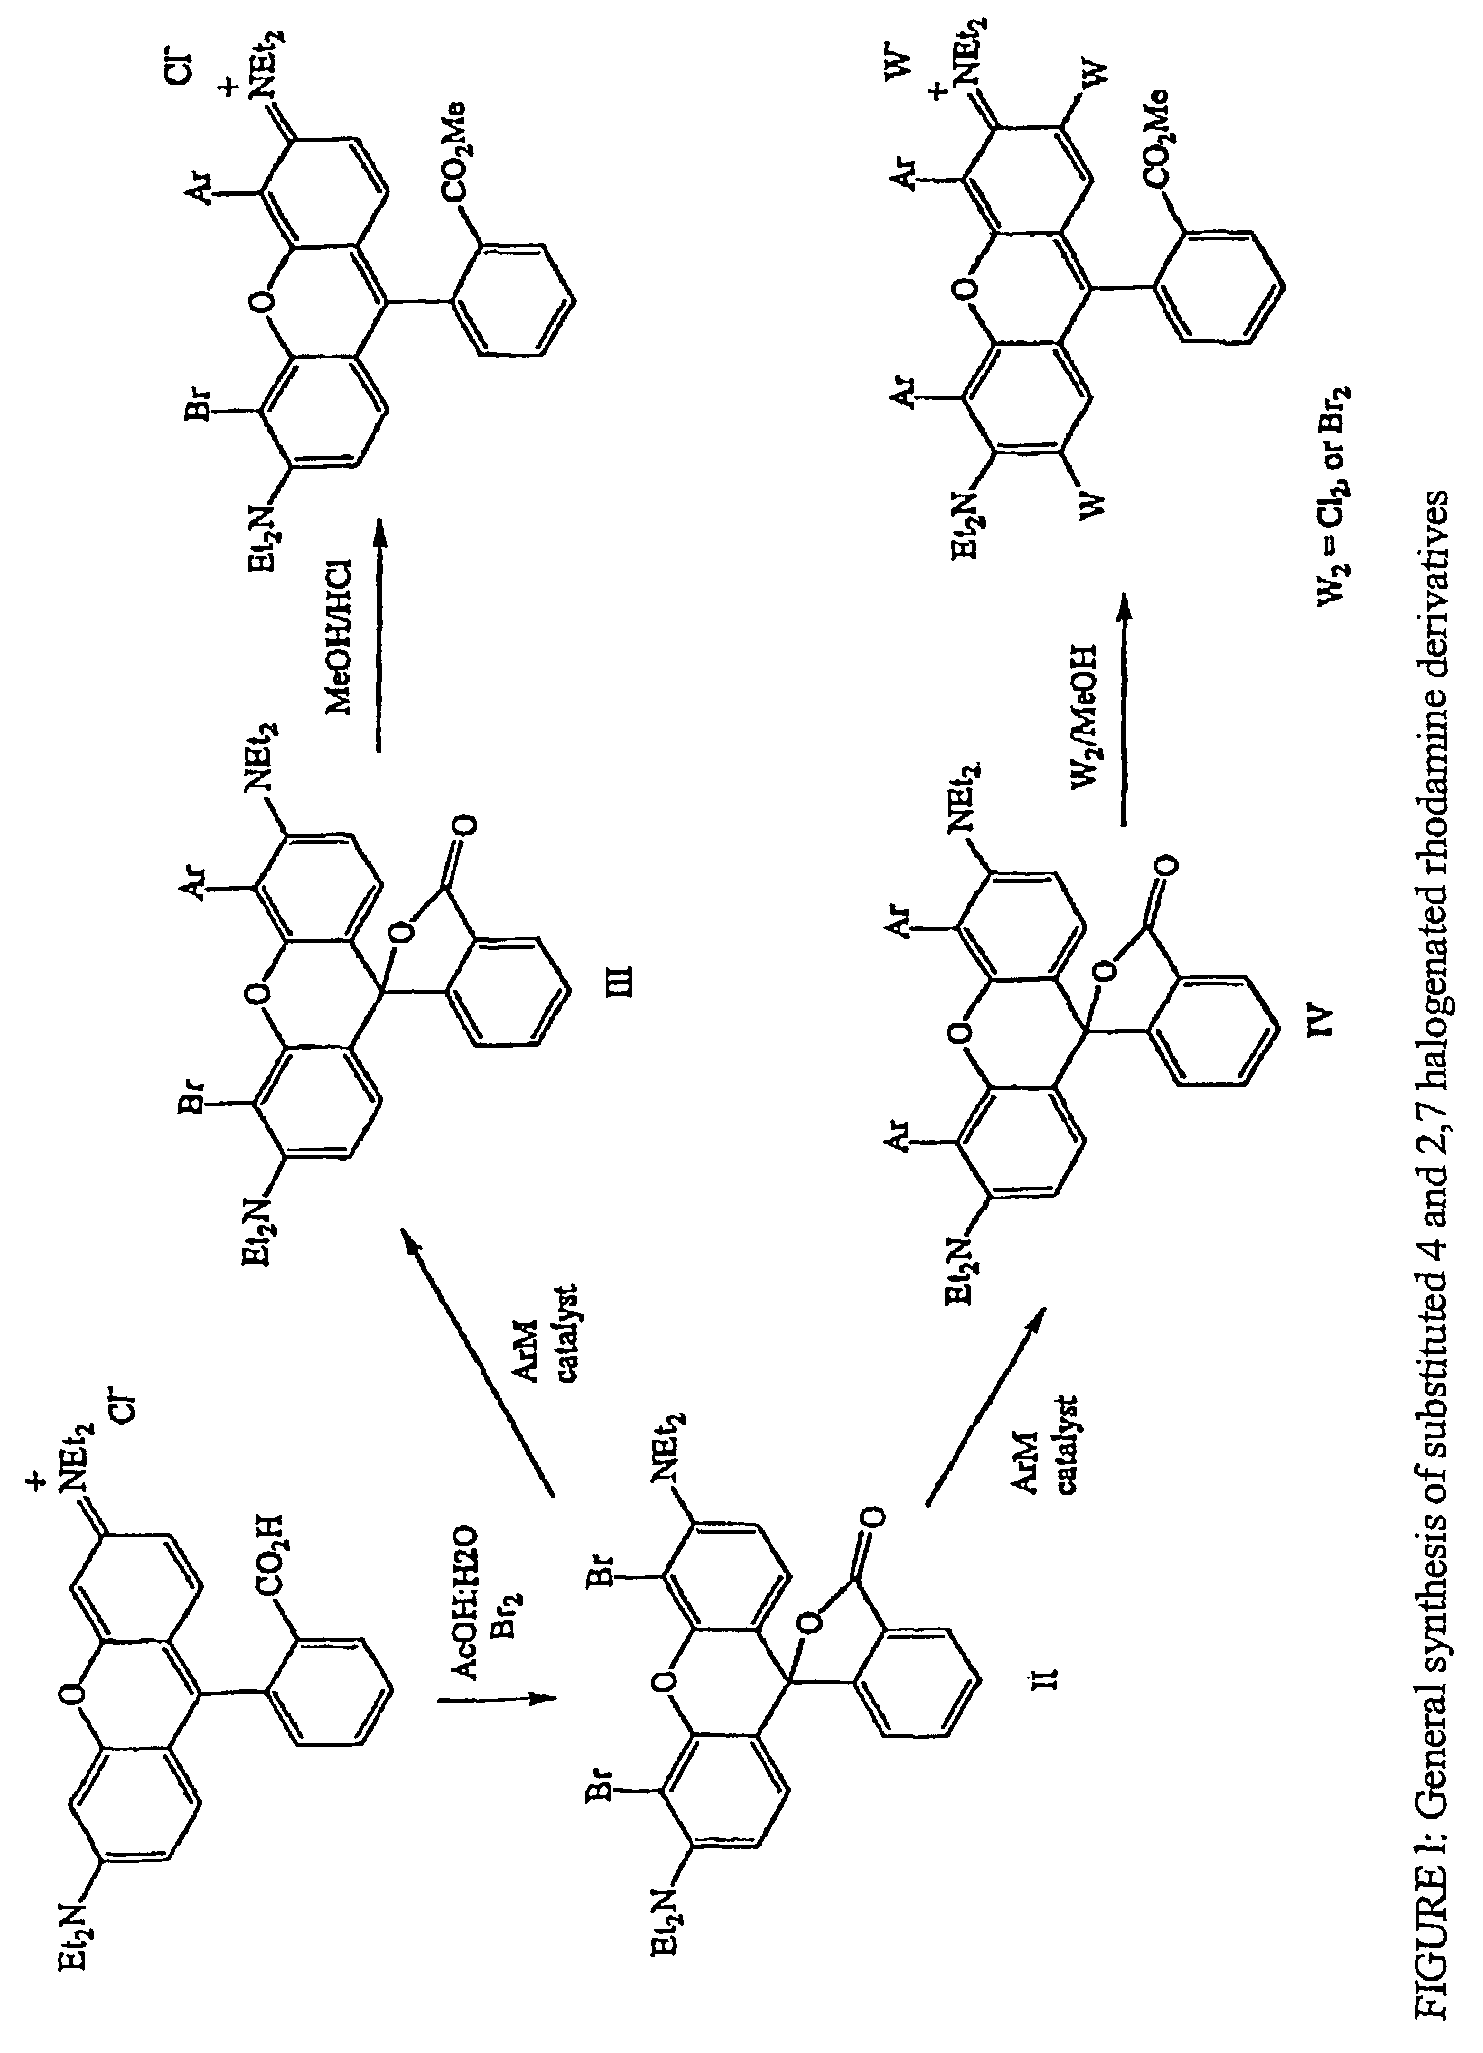 Halogenated rhodamine derivatives and applications thereof